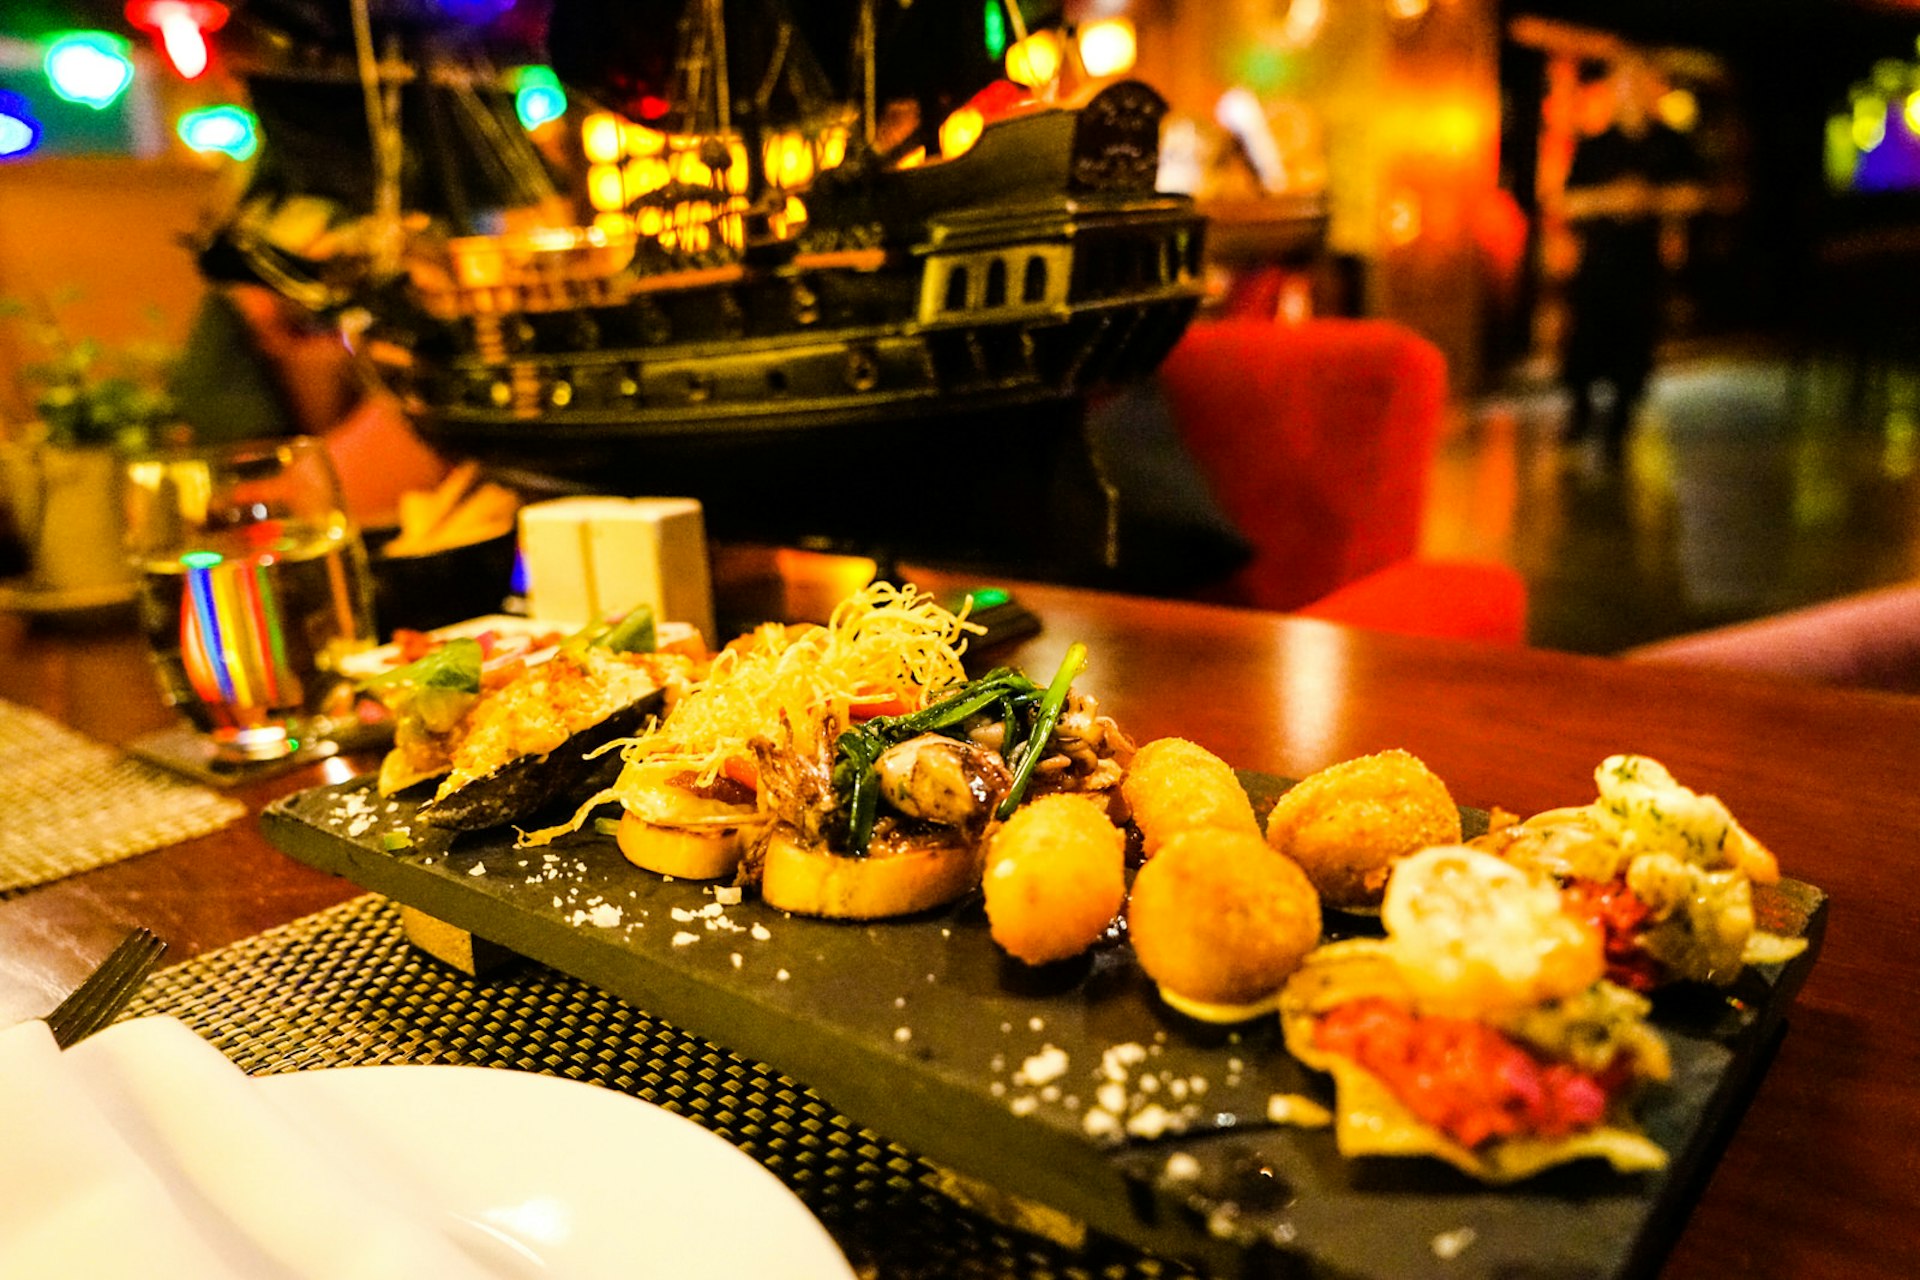 A selection of tapas served at Shri, in Ho Chi Minh City, on a slate. Including bruschetta, arancini balls and a number of other small bites. This rooftop bars has a nautical theme.